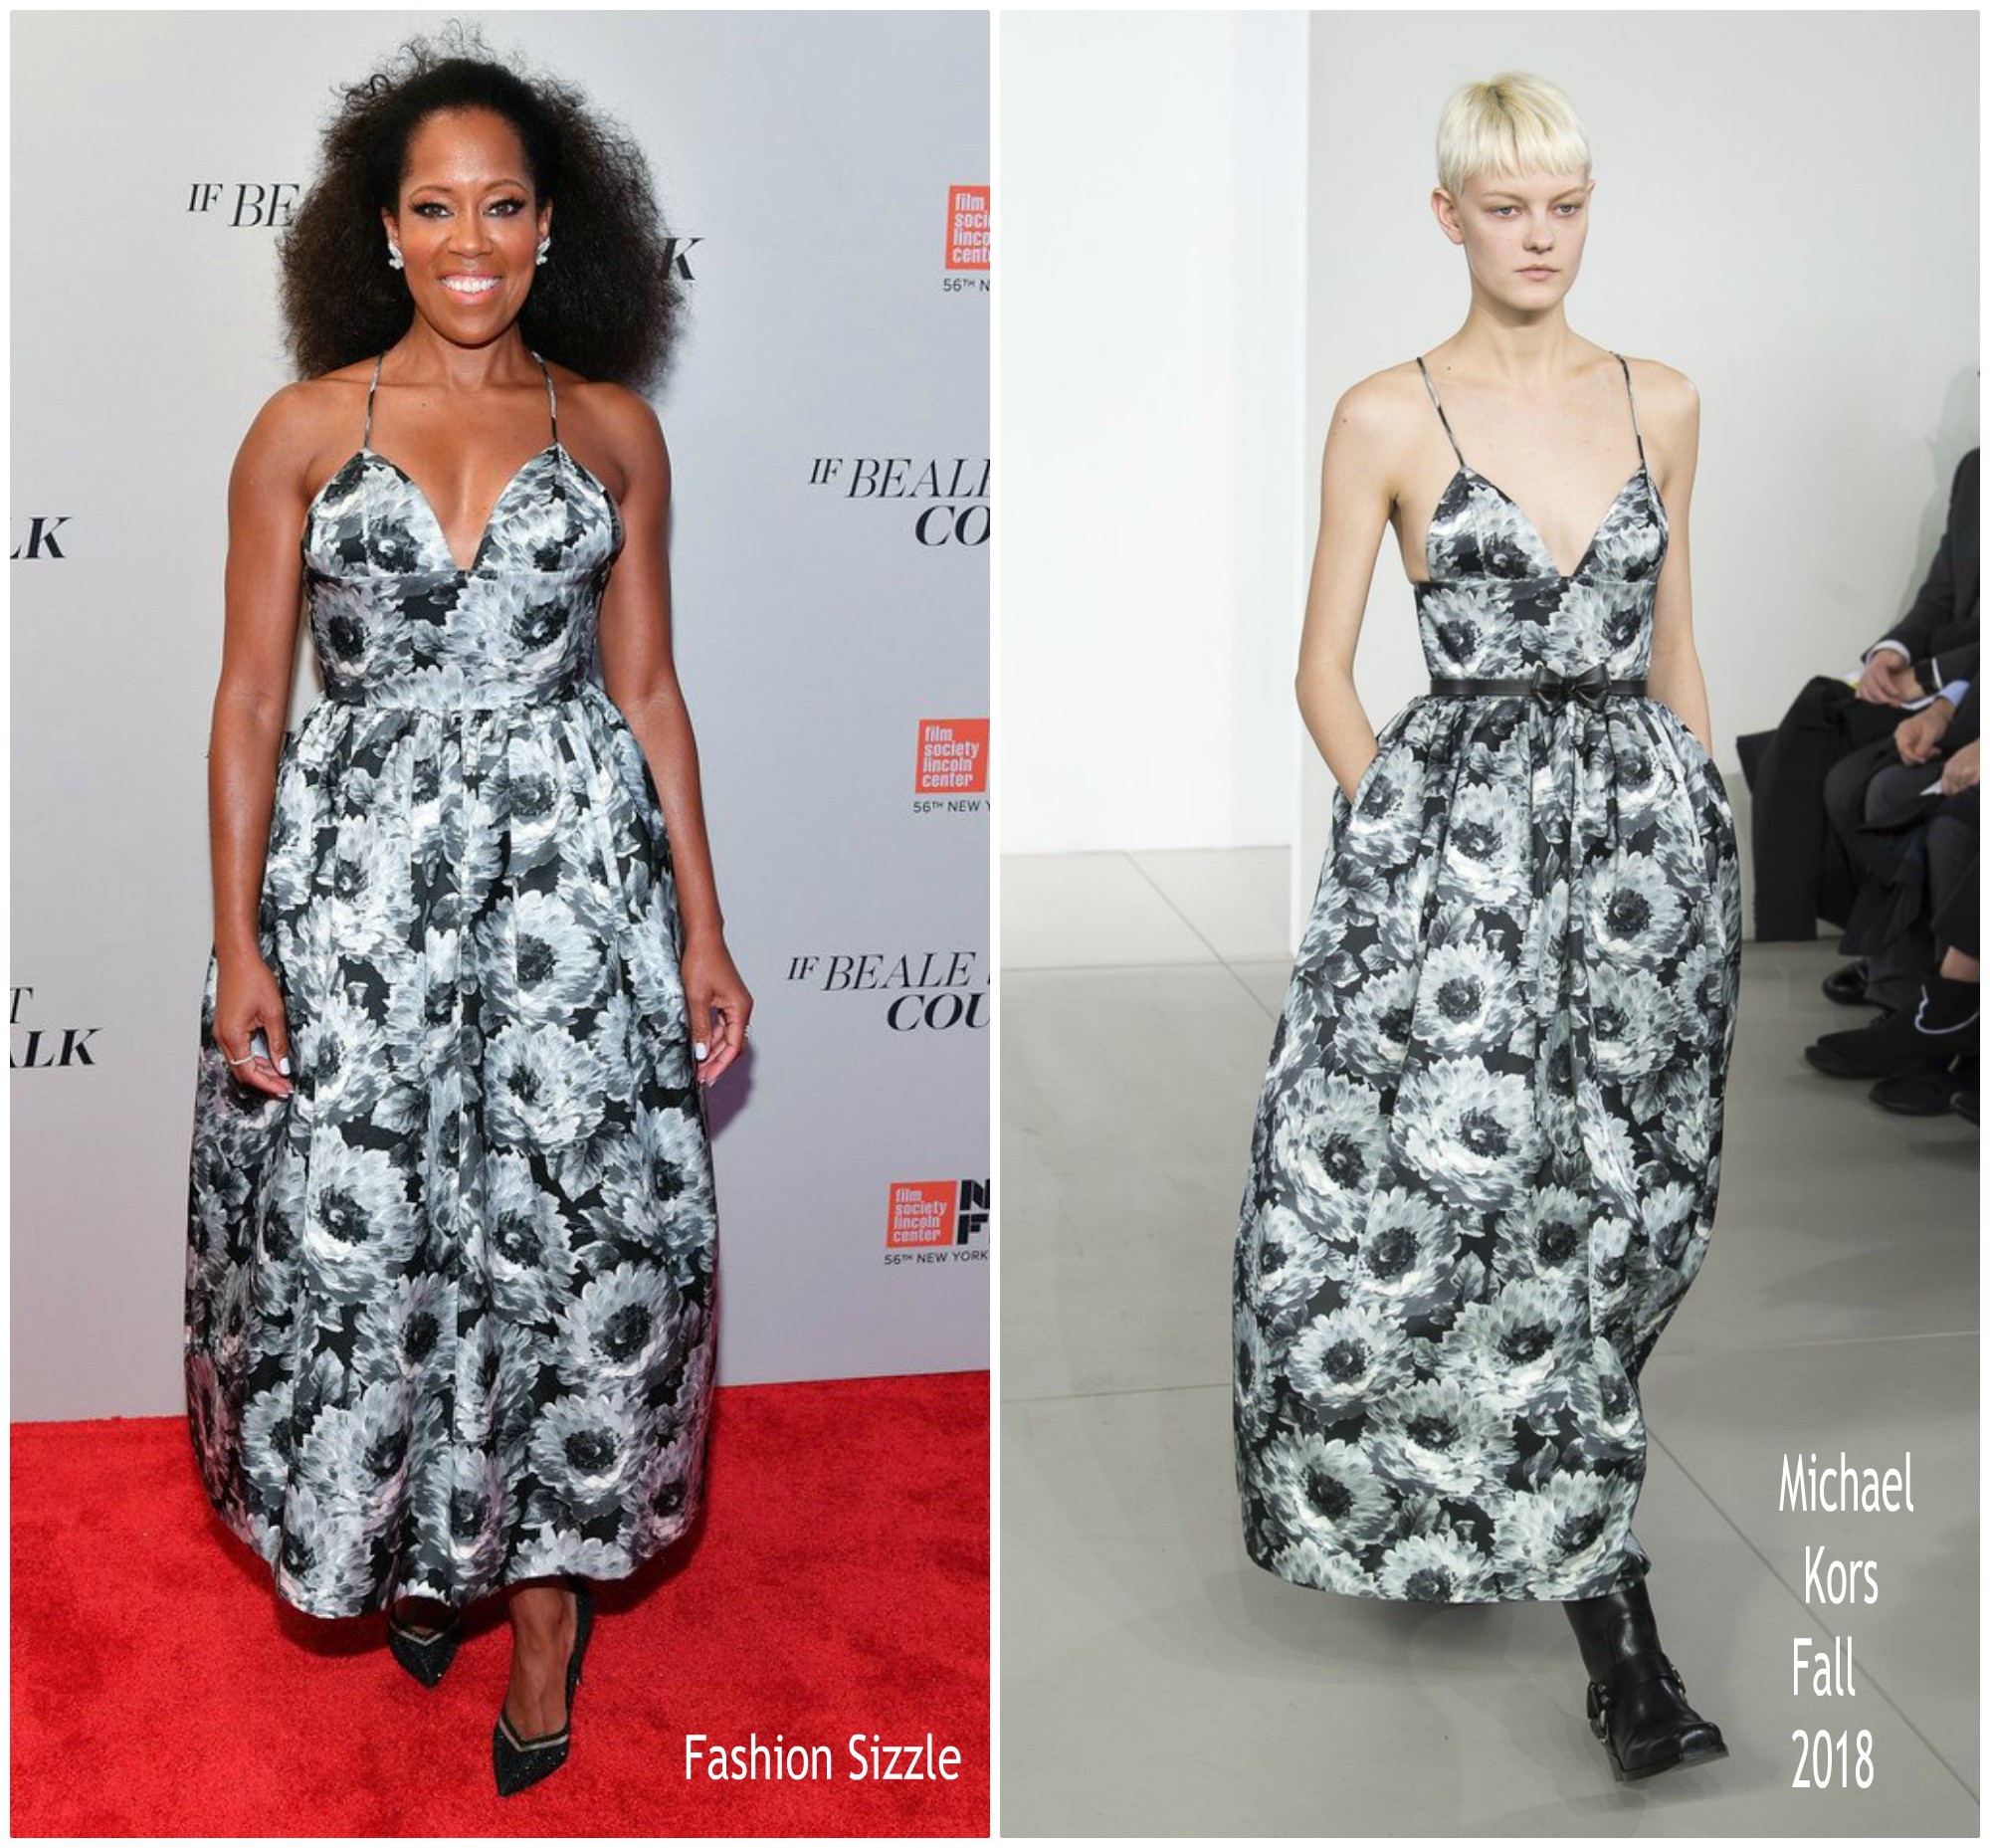 regina-king-in-michael-kors-collection-if-beale-street-could-talk-new-york-film-festival-premiere